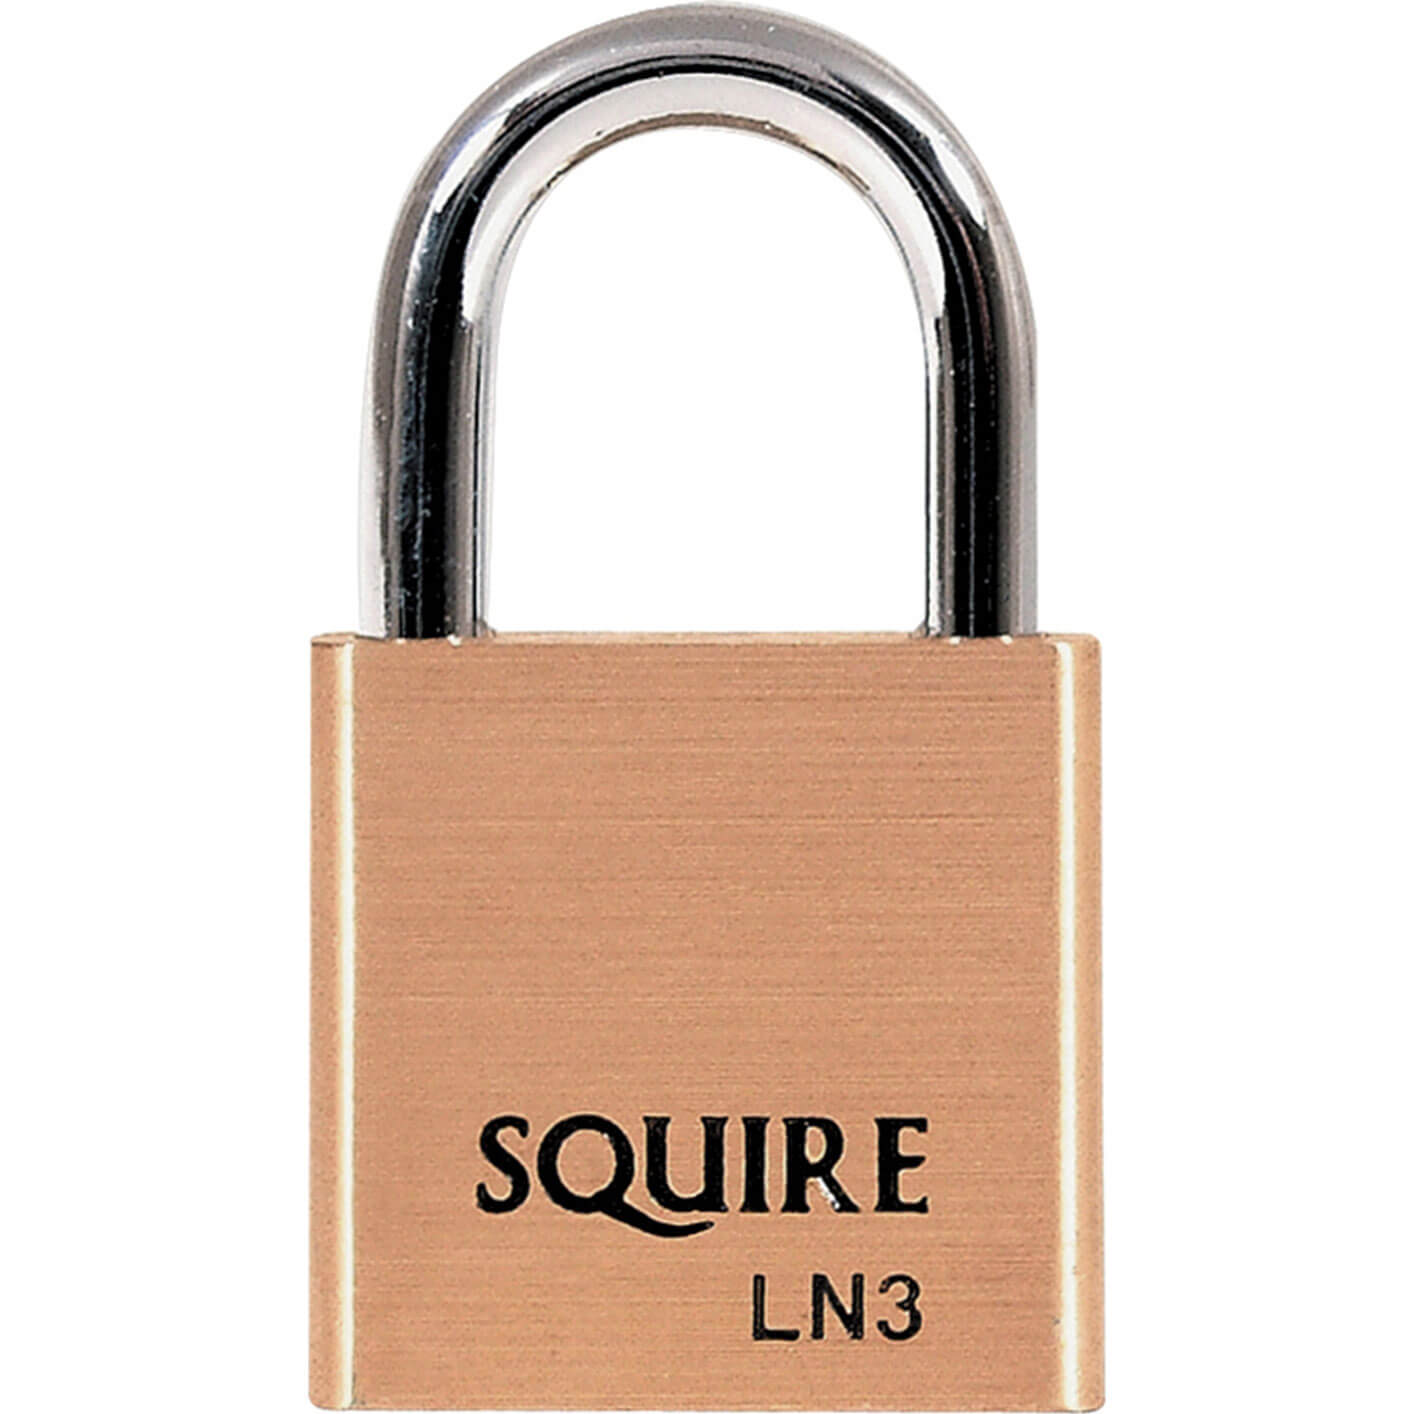 Image of Squire Lion Series Brass Padlock 30mm Standard